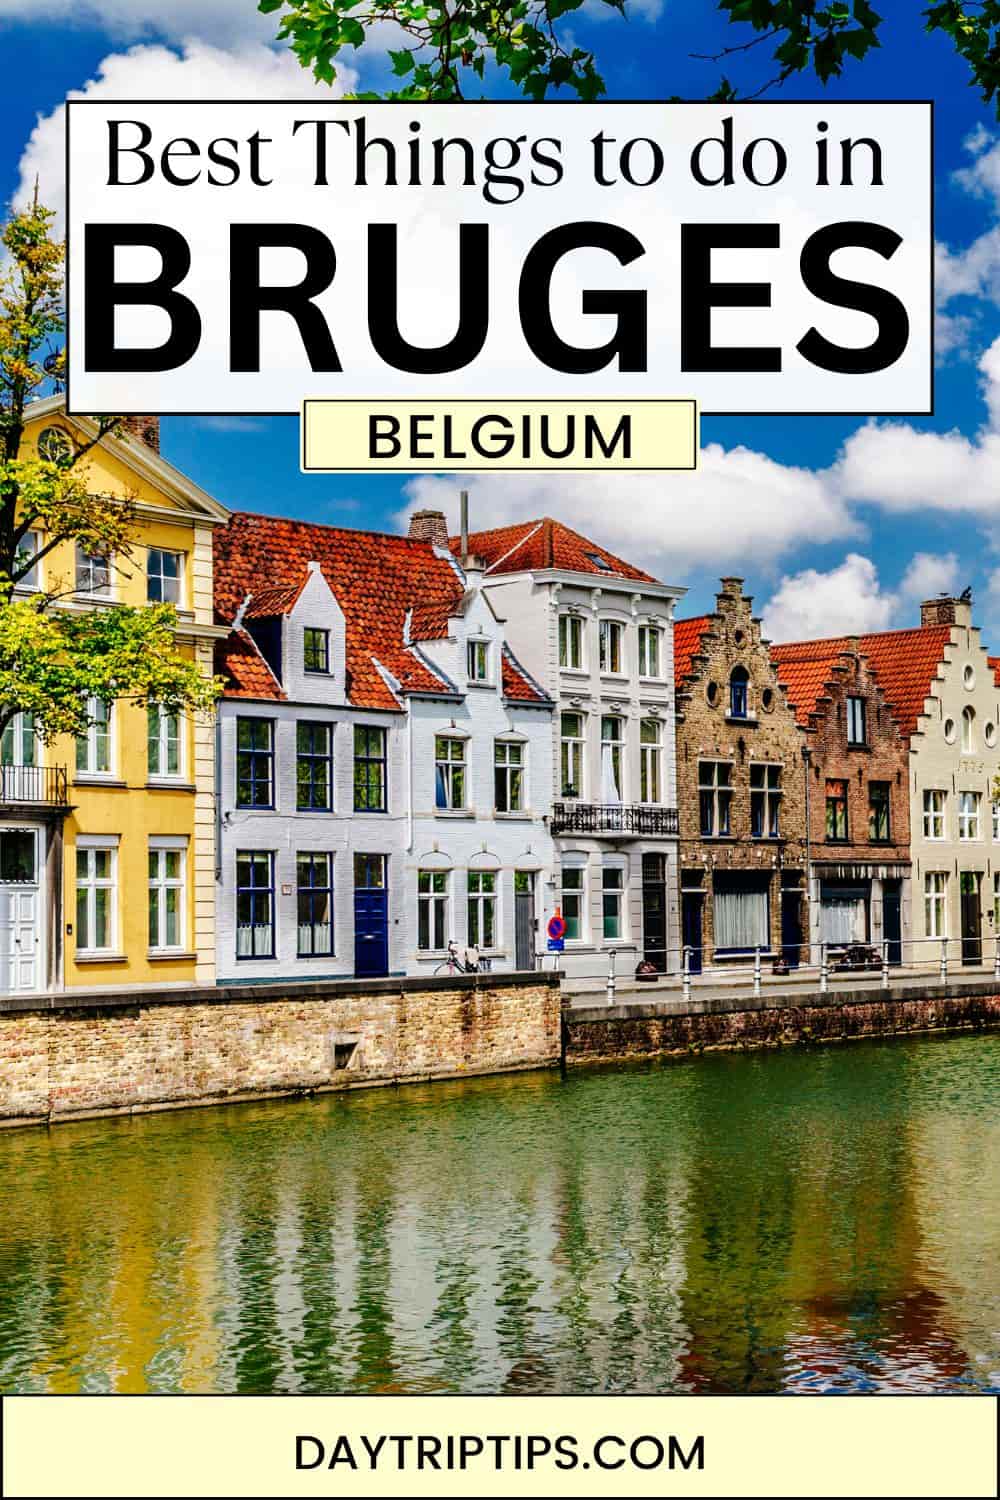 Best Things to do in Bruges Belgium